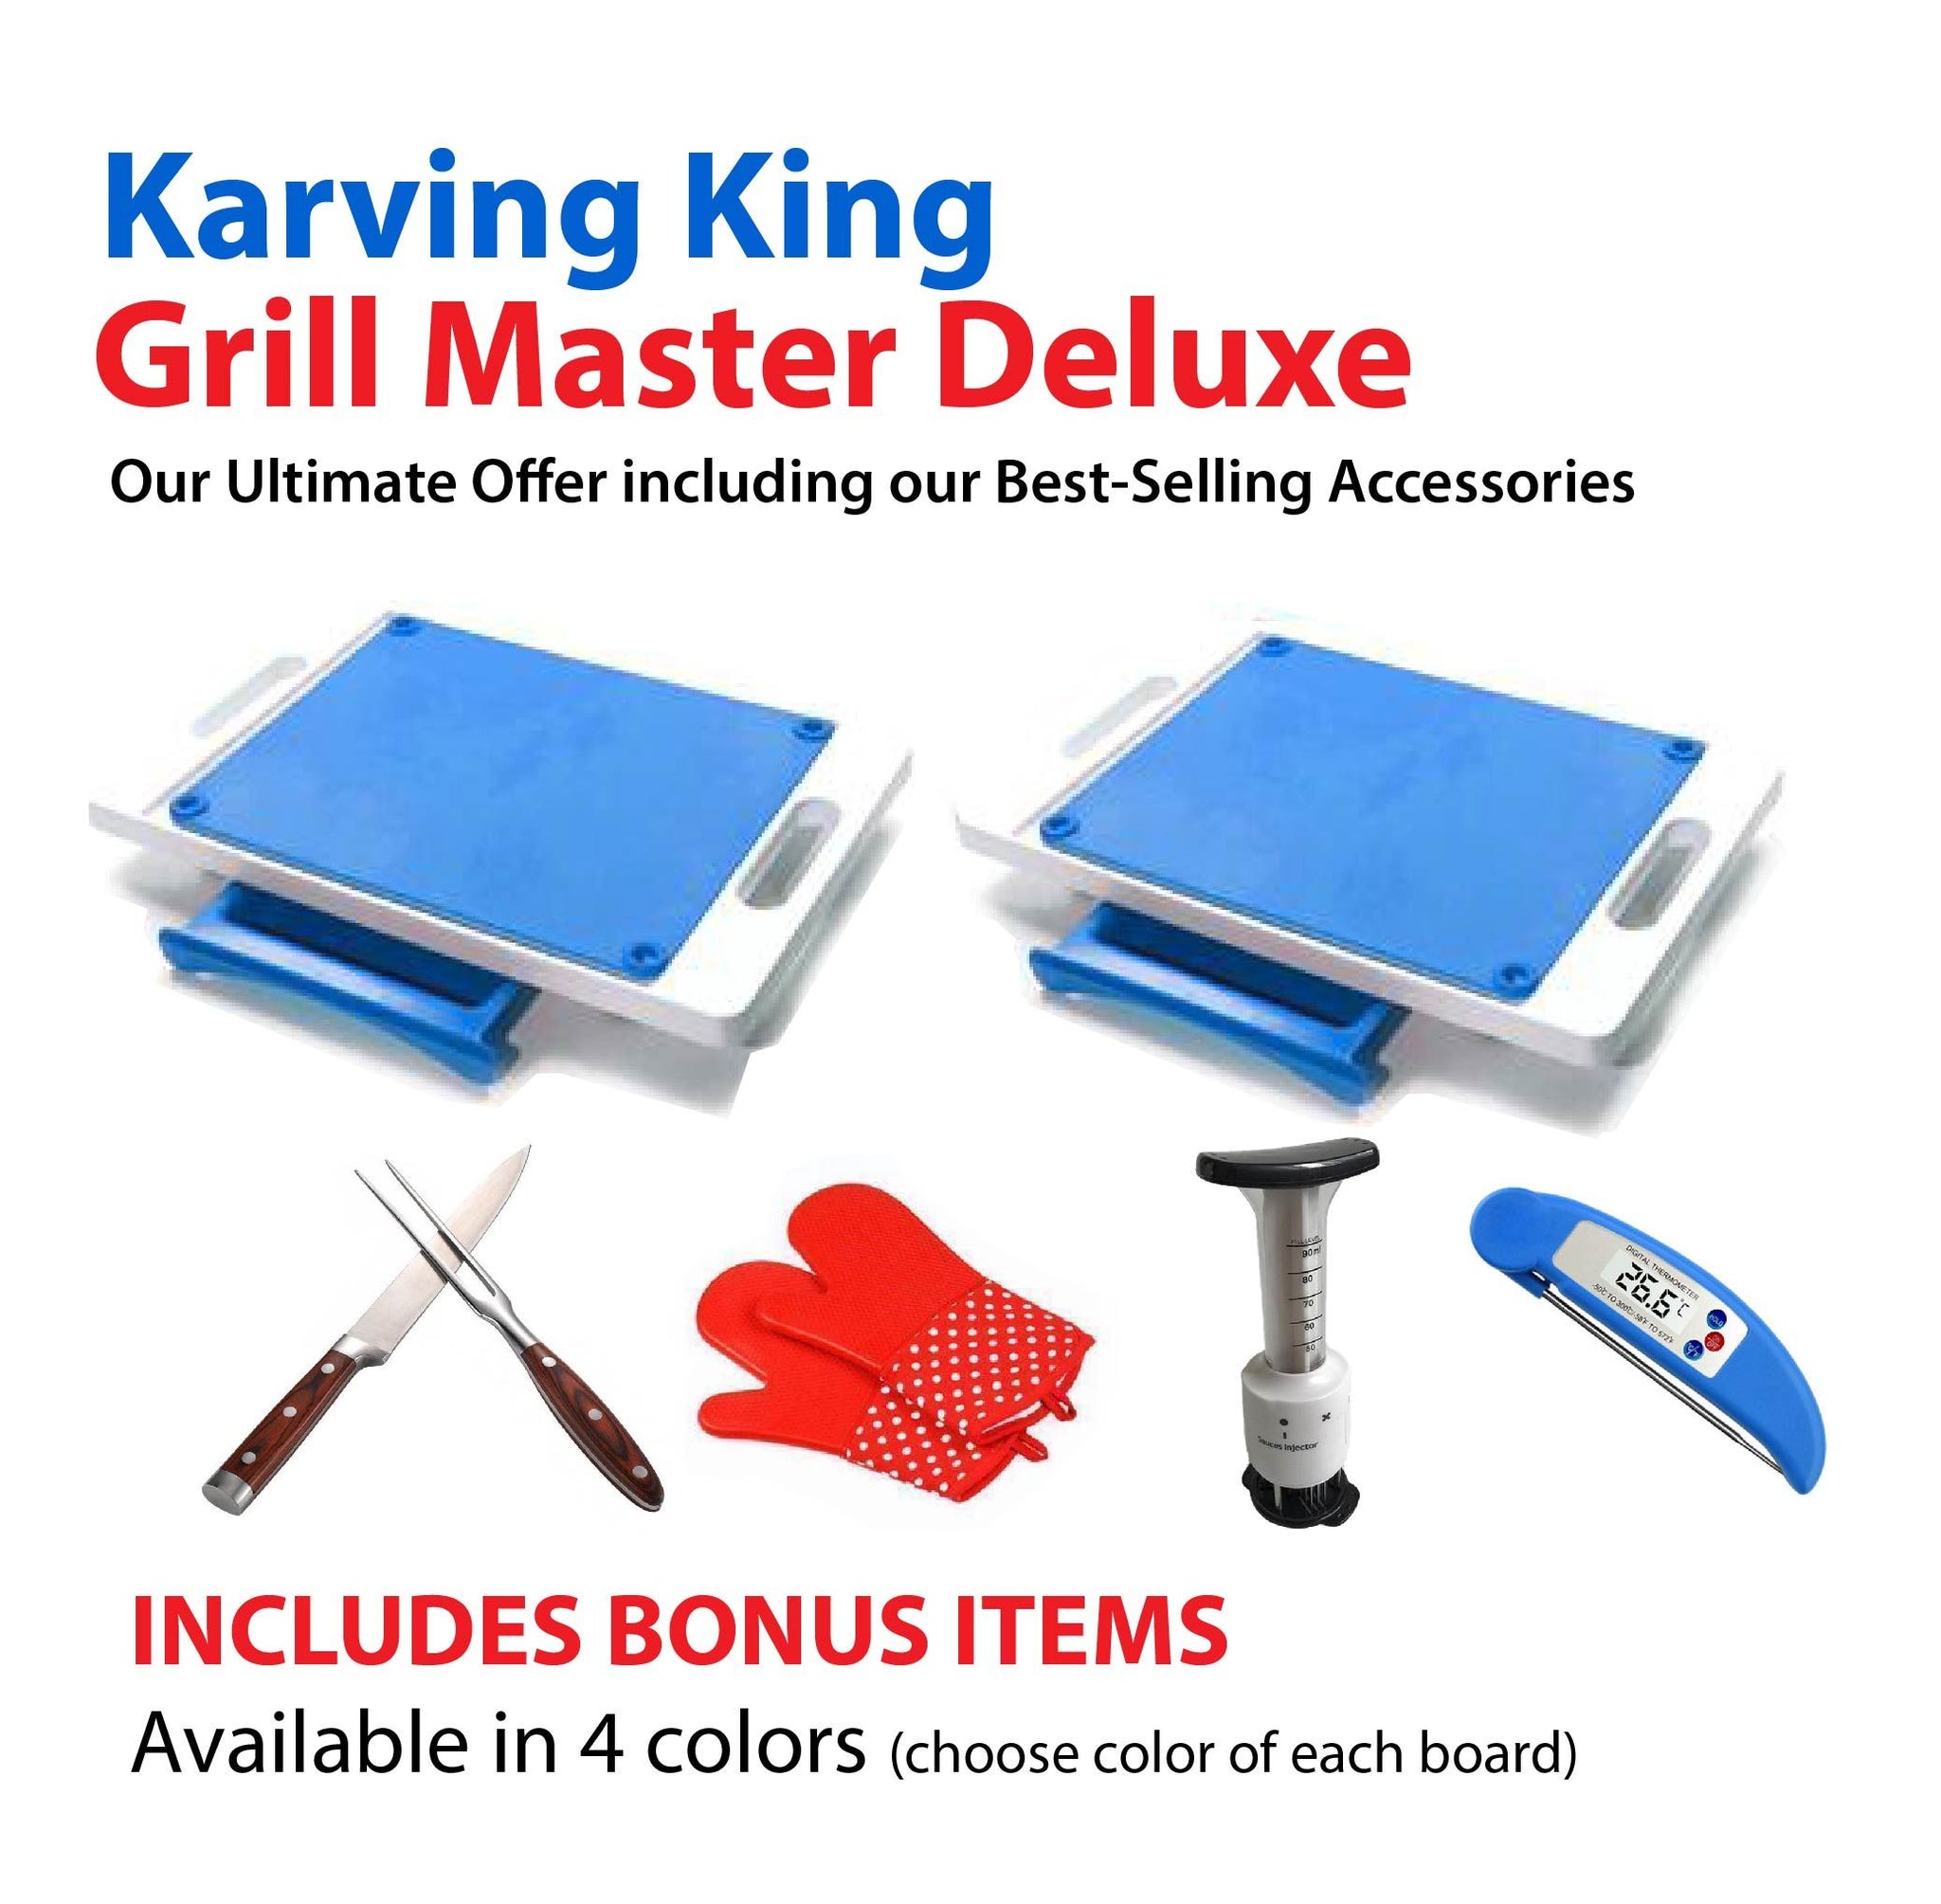 Set of 2 Dripless Cutting Boards 2 In 1 System With Digital Meat Thermometer, Professional Carving Set, Meat Flavorizer/Tenderizer and Set of 2 Silicone Oven Mitts